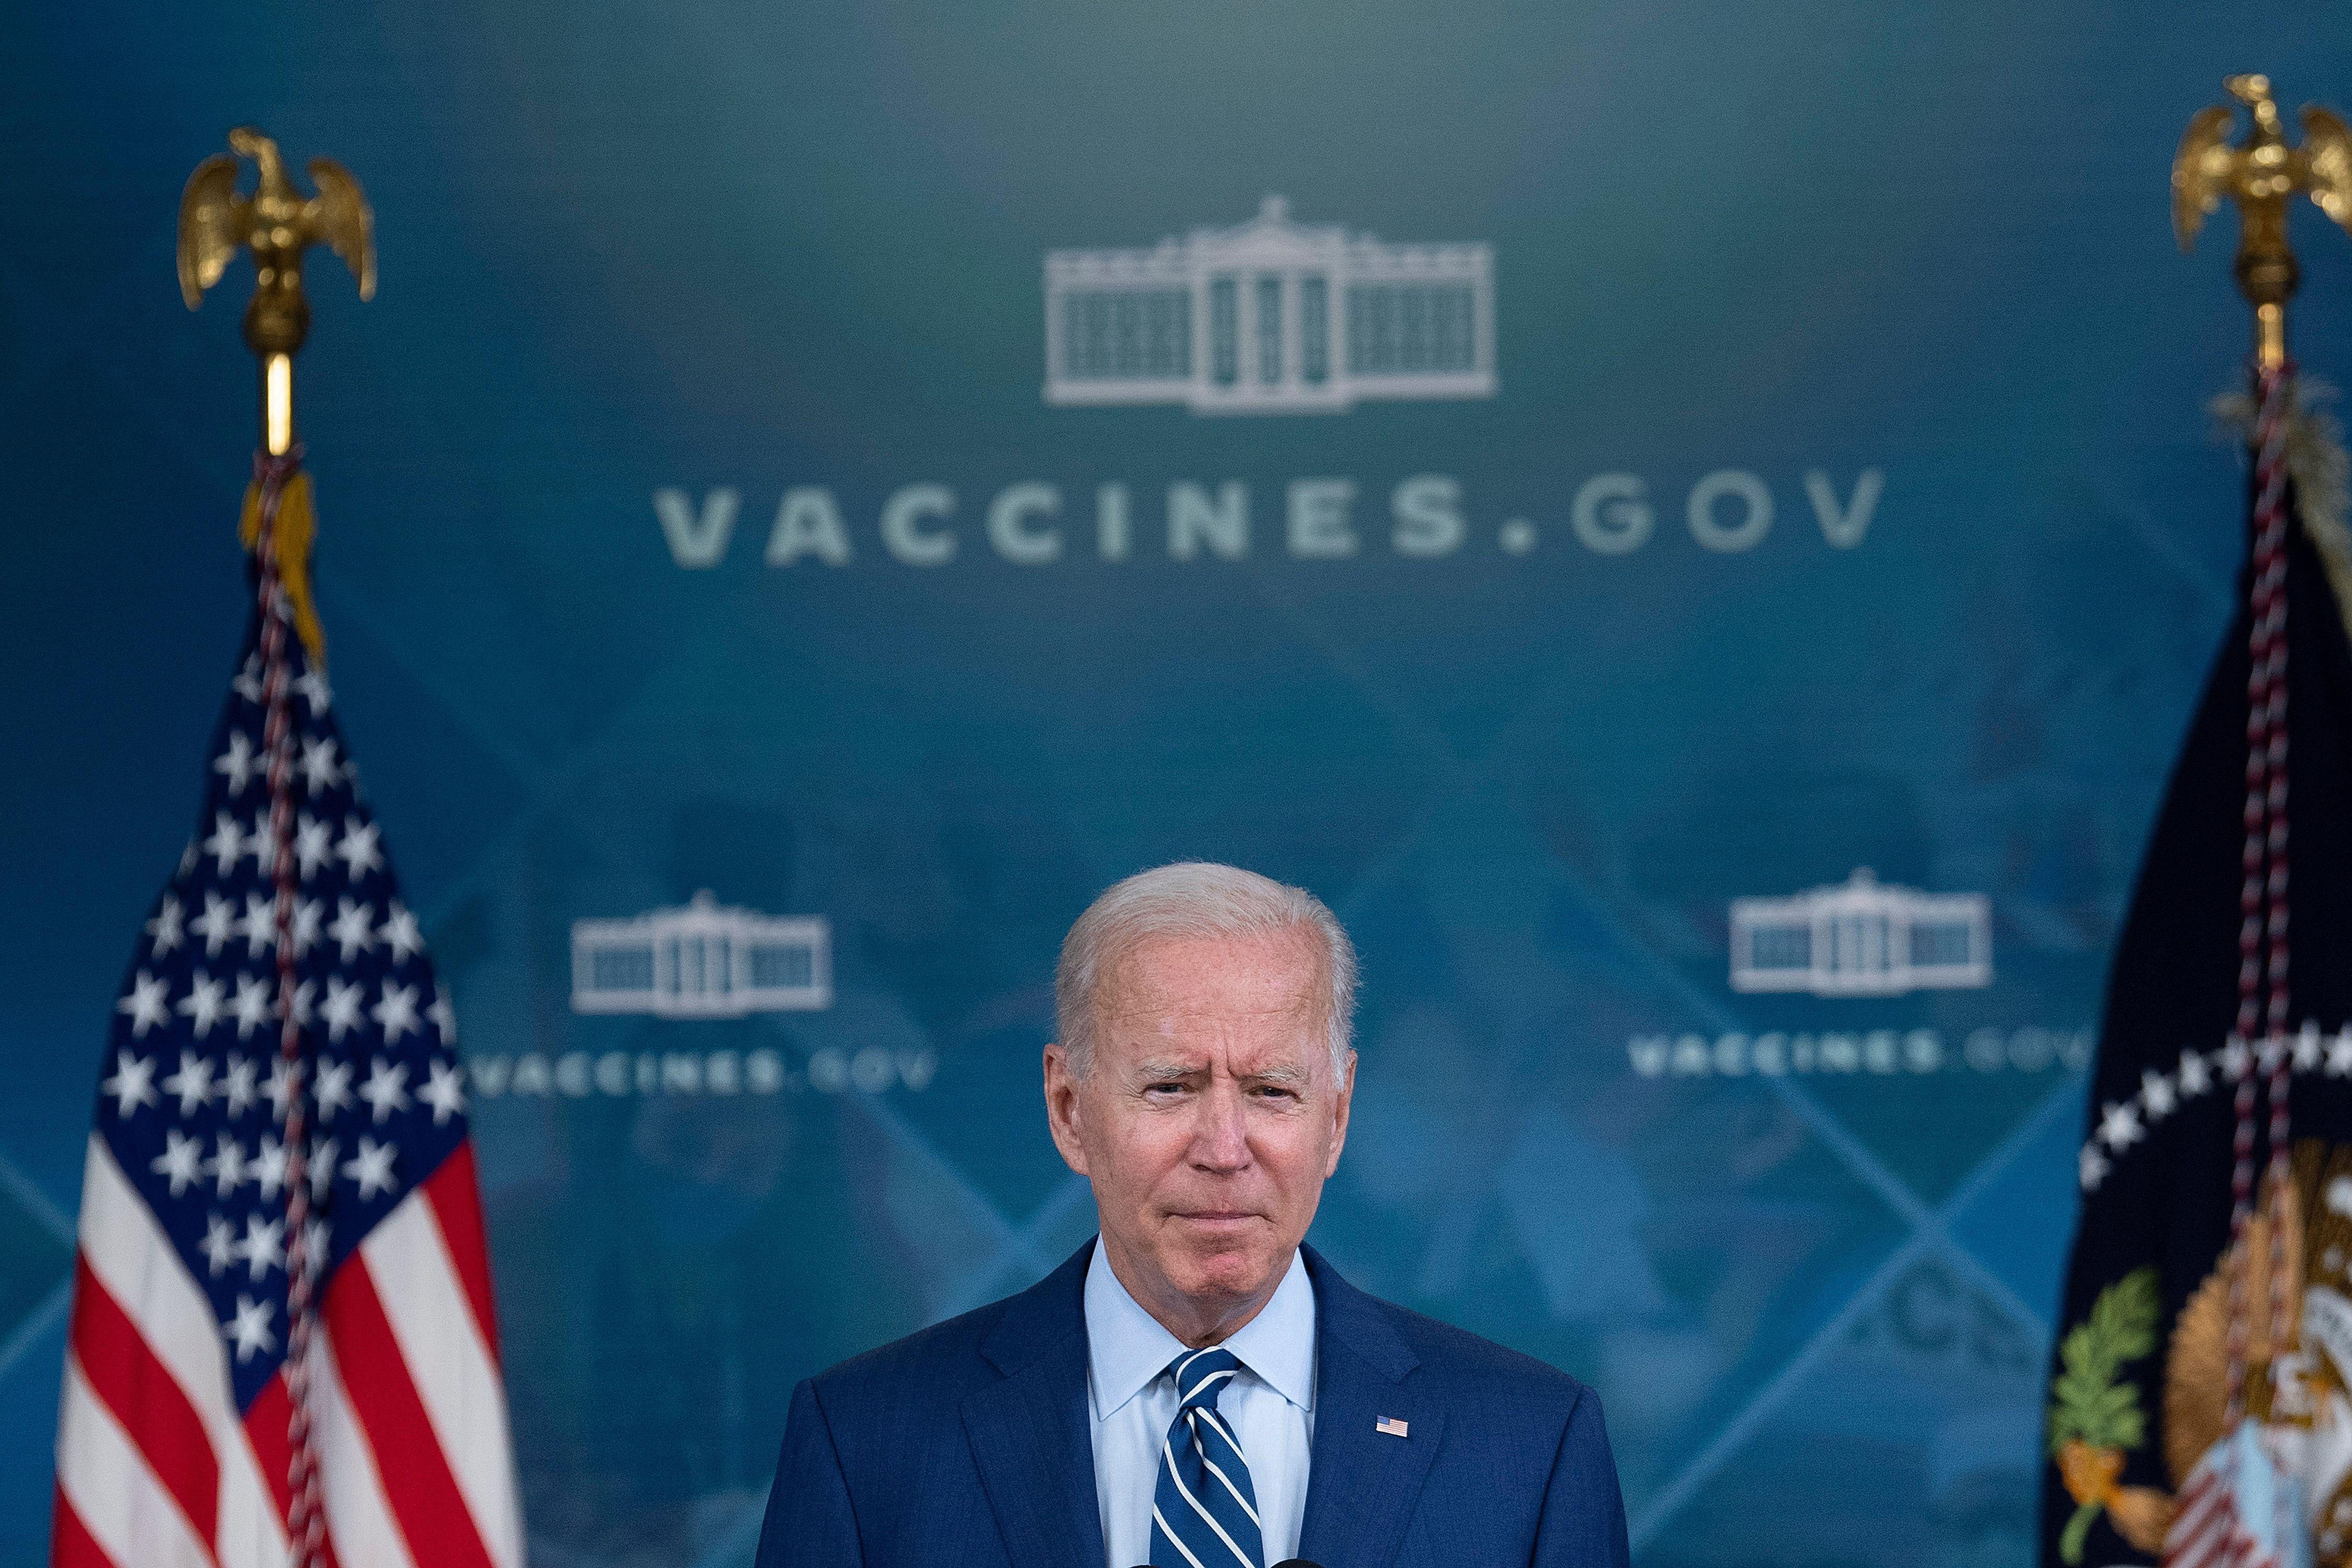 Biden stands in front of an American flag, a presidential flag, and a backdrop that says vaccines.gov